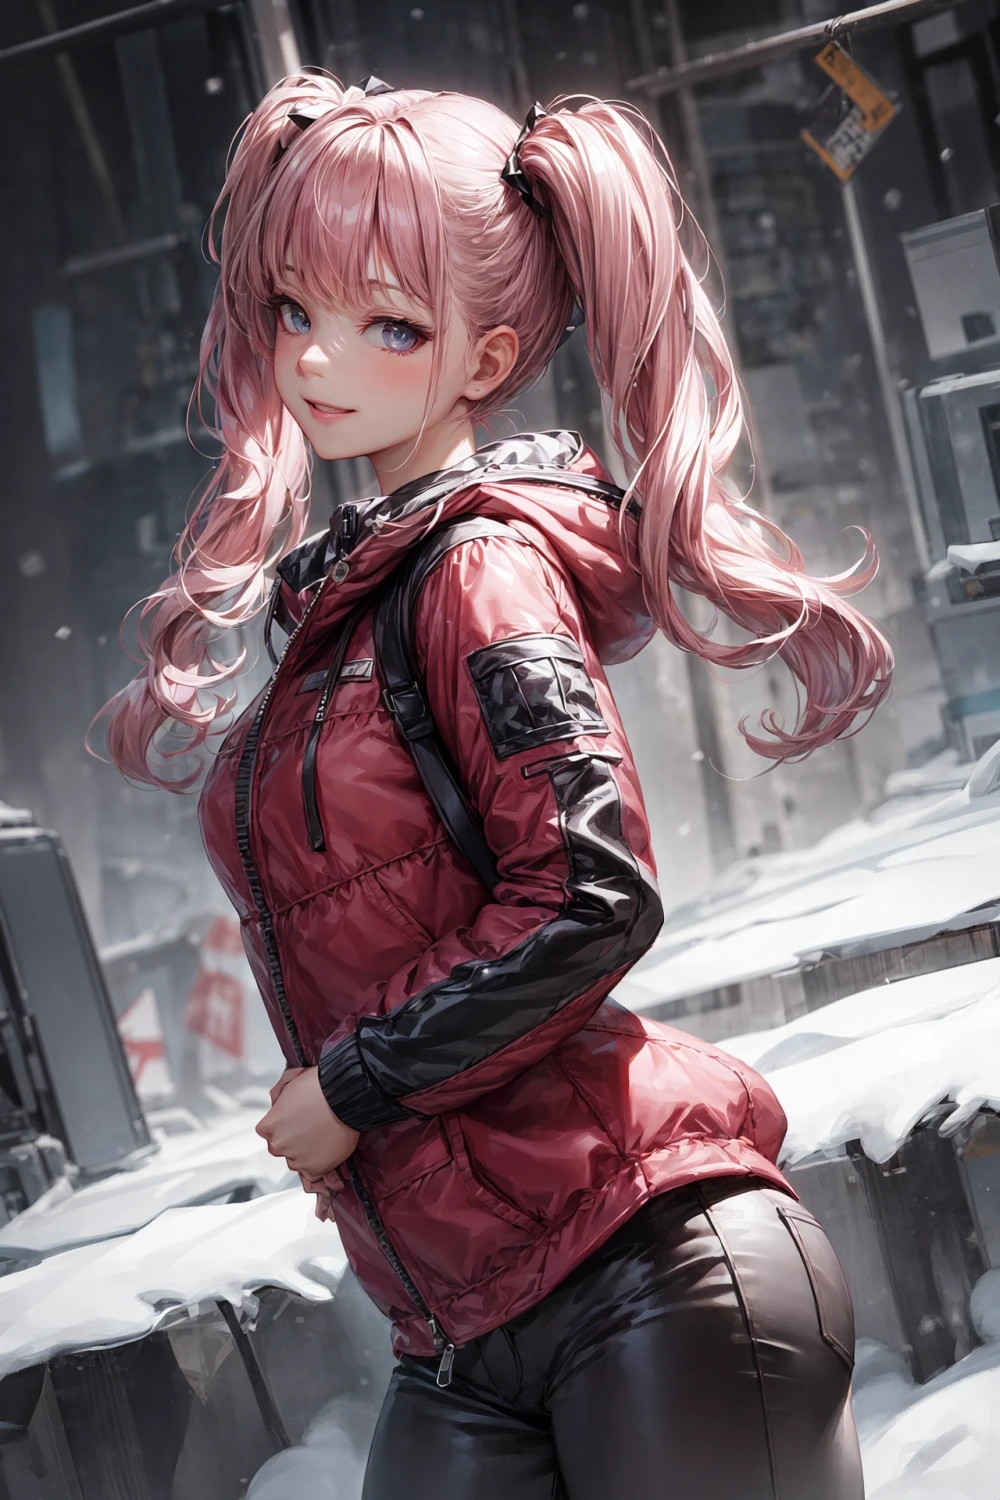 pink-hair-anime-style-all-ages-5